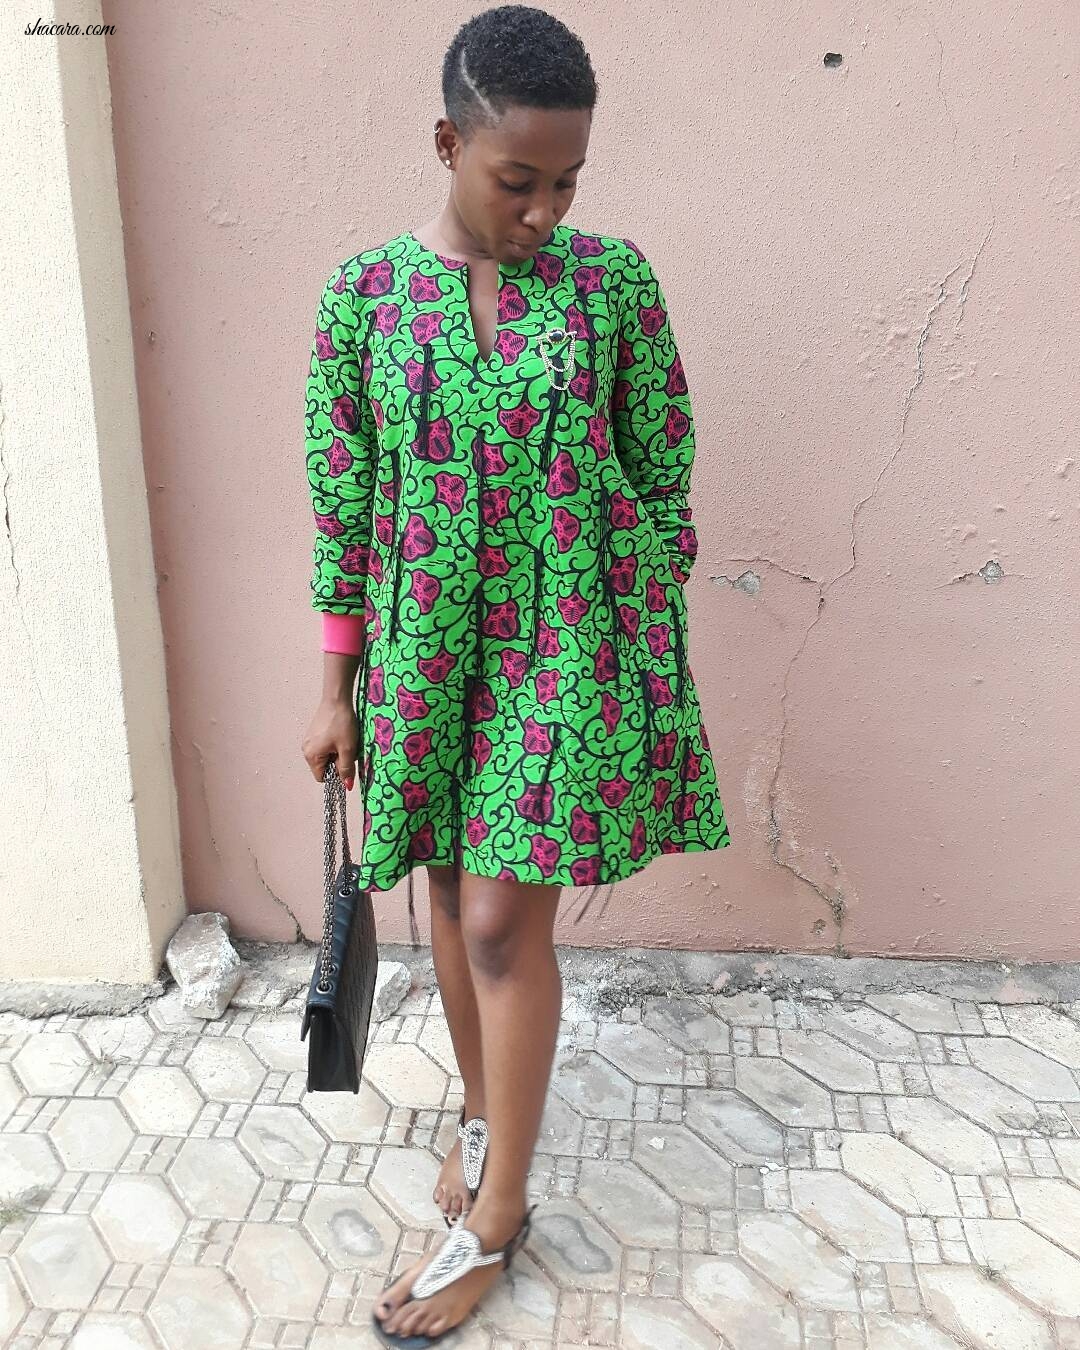 BE BOLD AND STUNNING IN THIS LATEST ANKARA STYLES